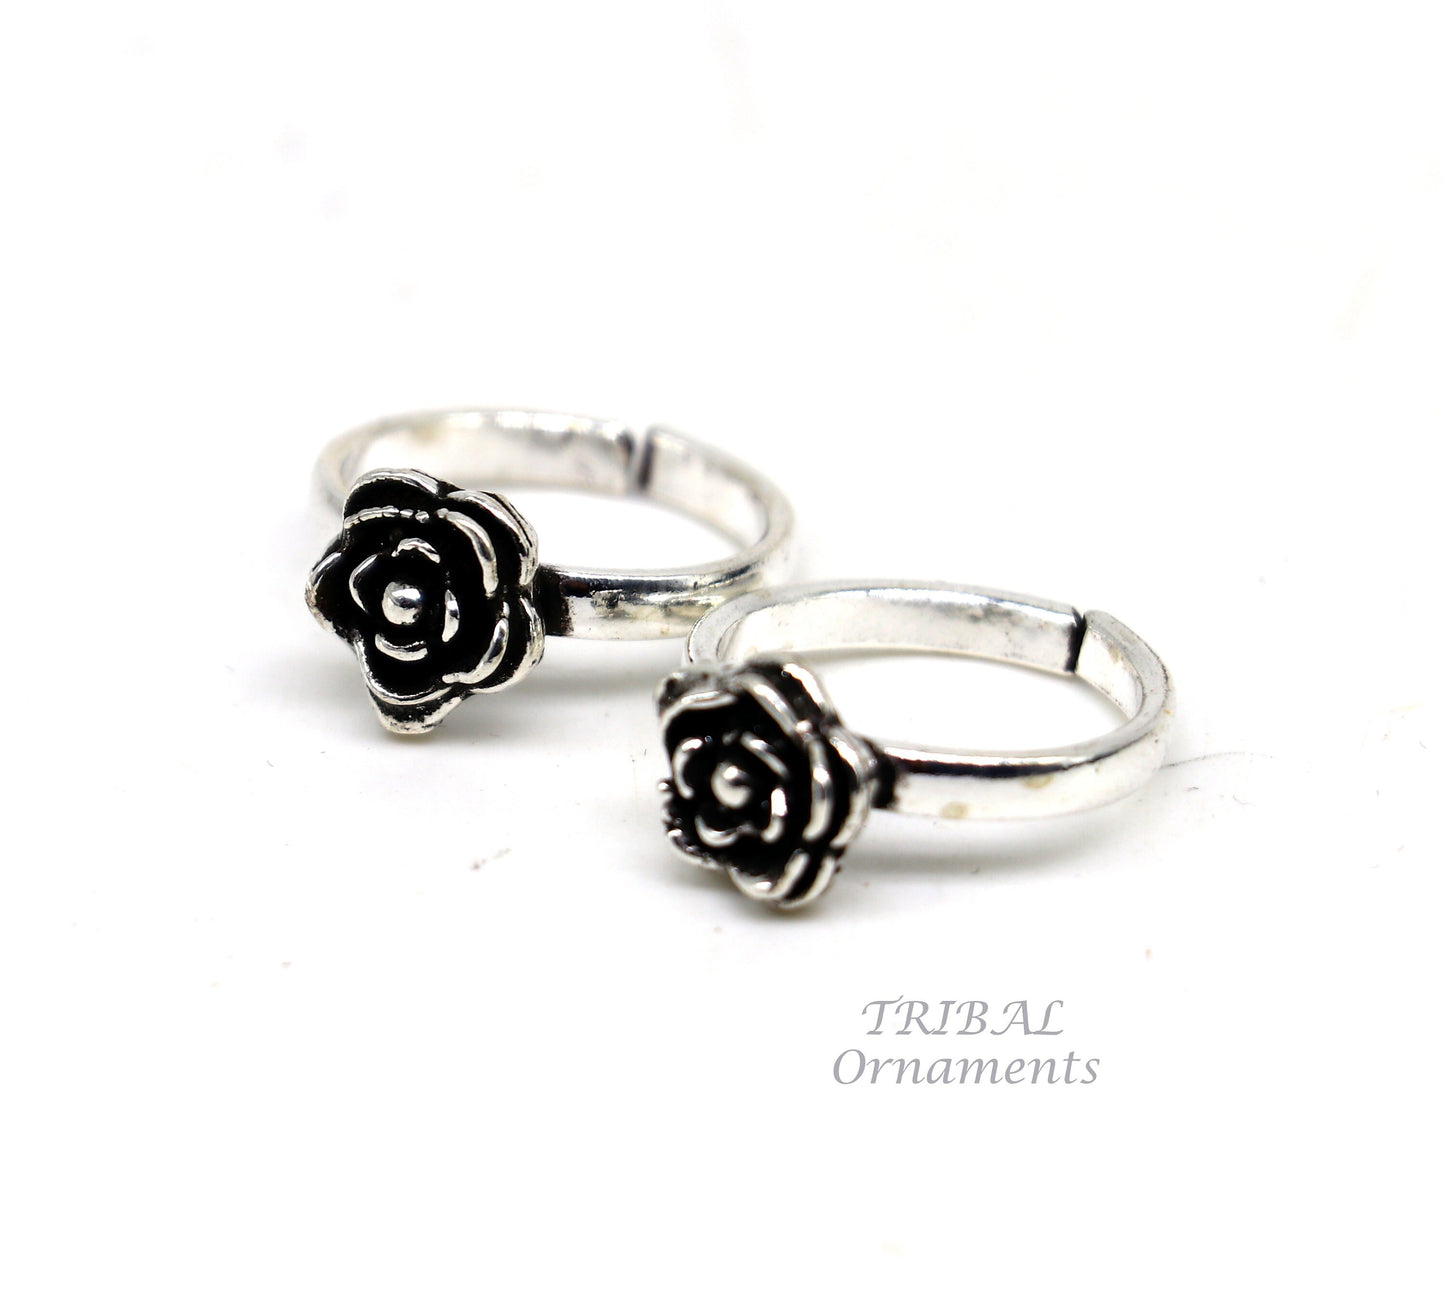 925 sterling silver handmade amazing rose flower design toe ring band tribal belly dance vintage style ethnic brides jewelry ytr34 - TRIBAL ORNAMENTS